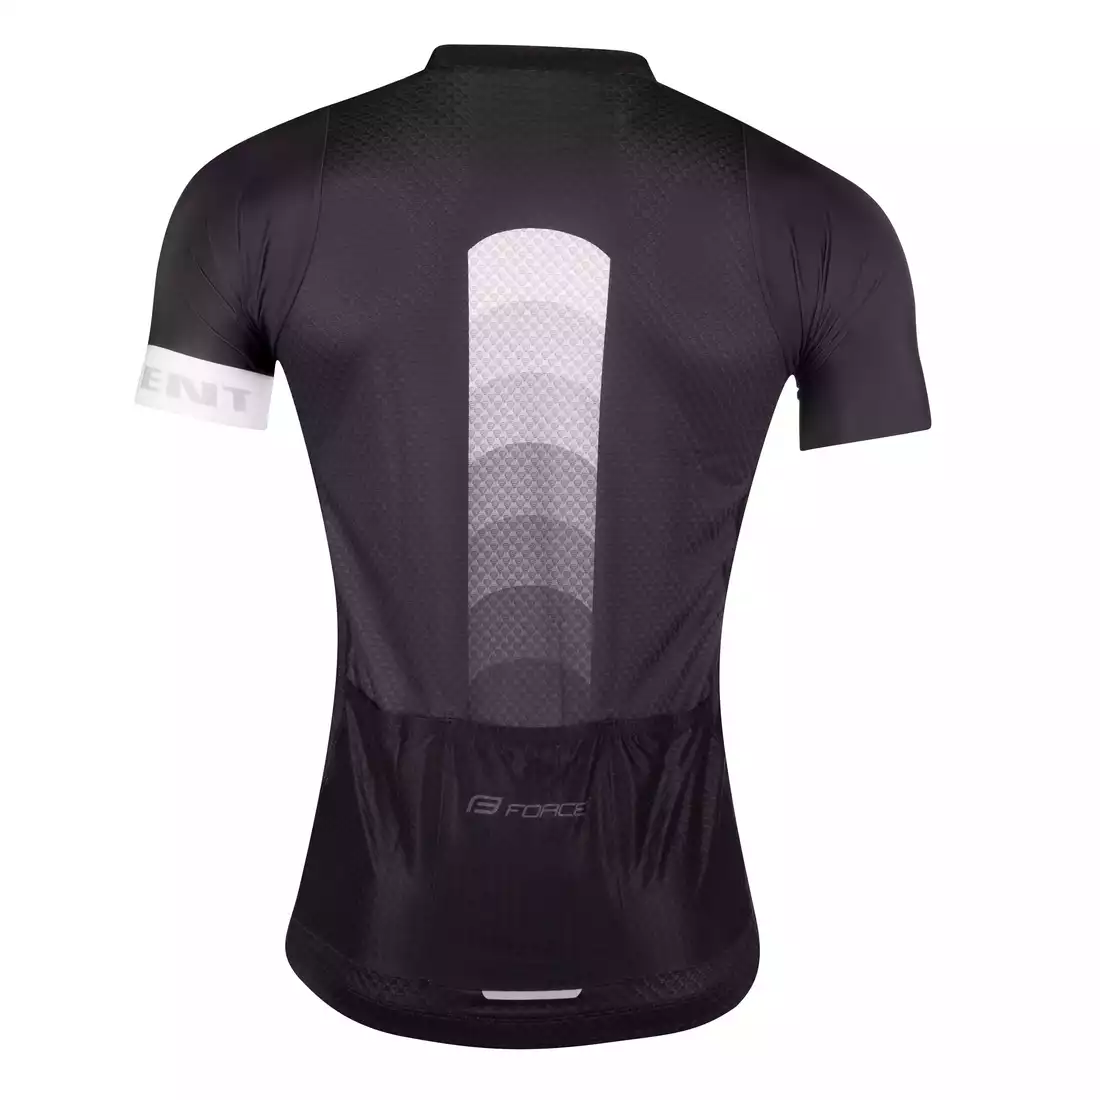 FORCE Men's cycling jersey ASCENT grey/white 900117